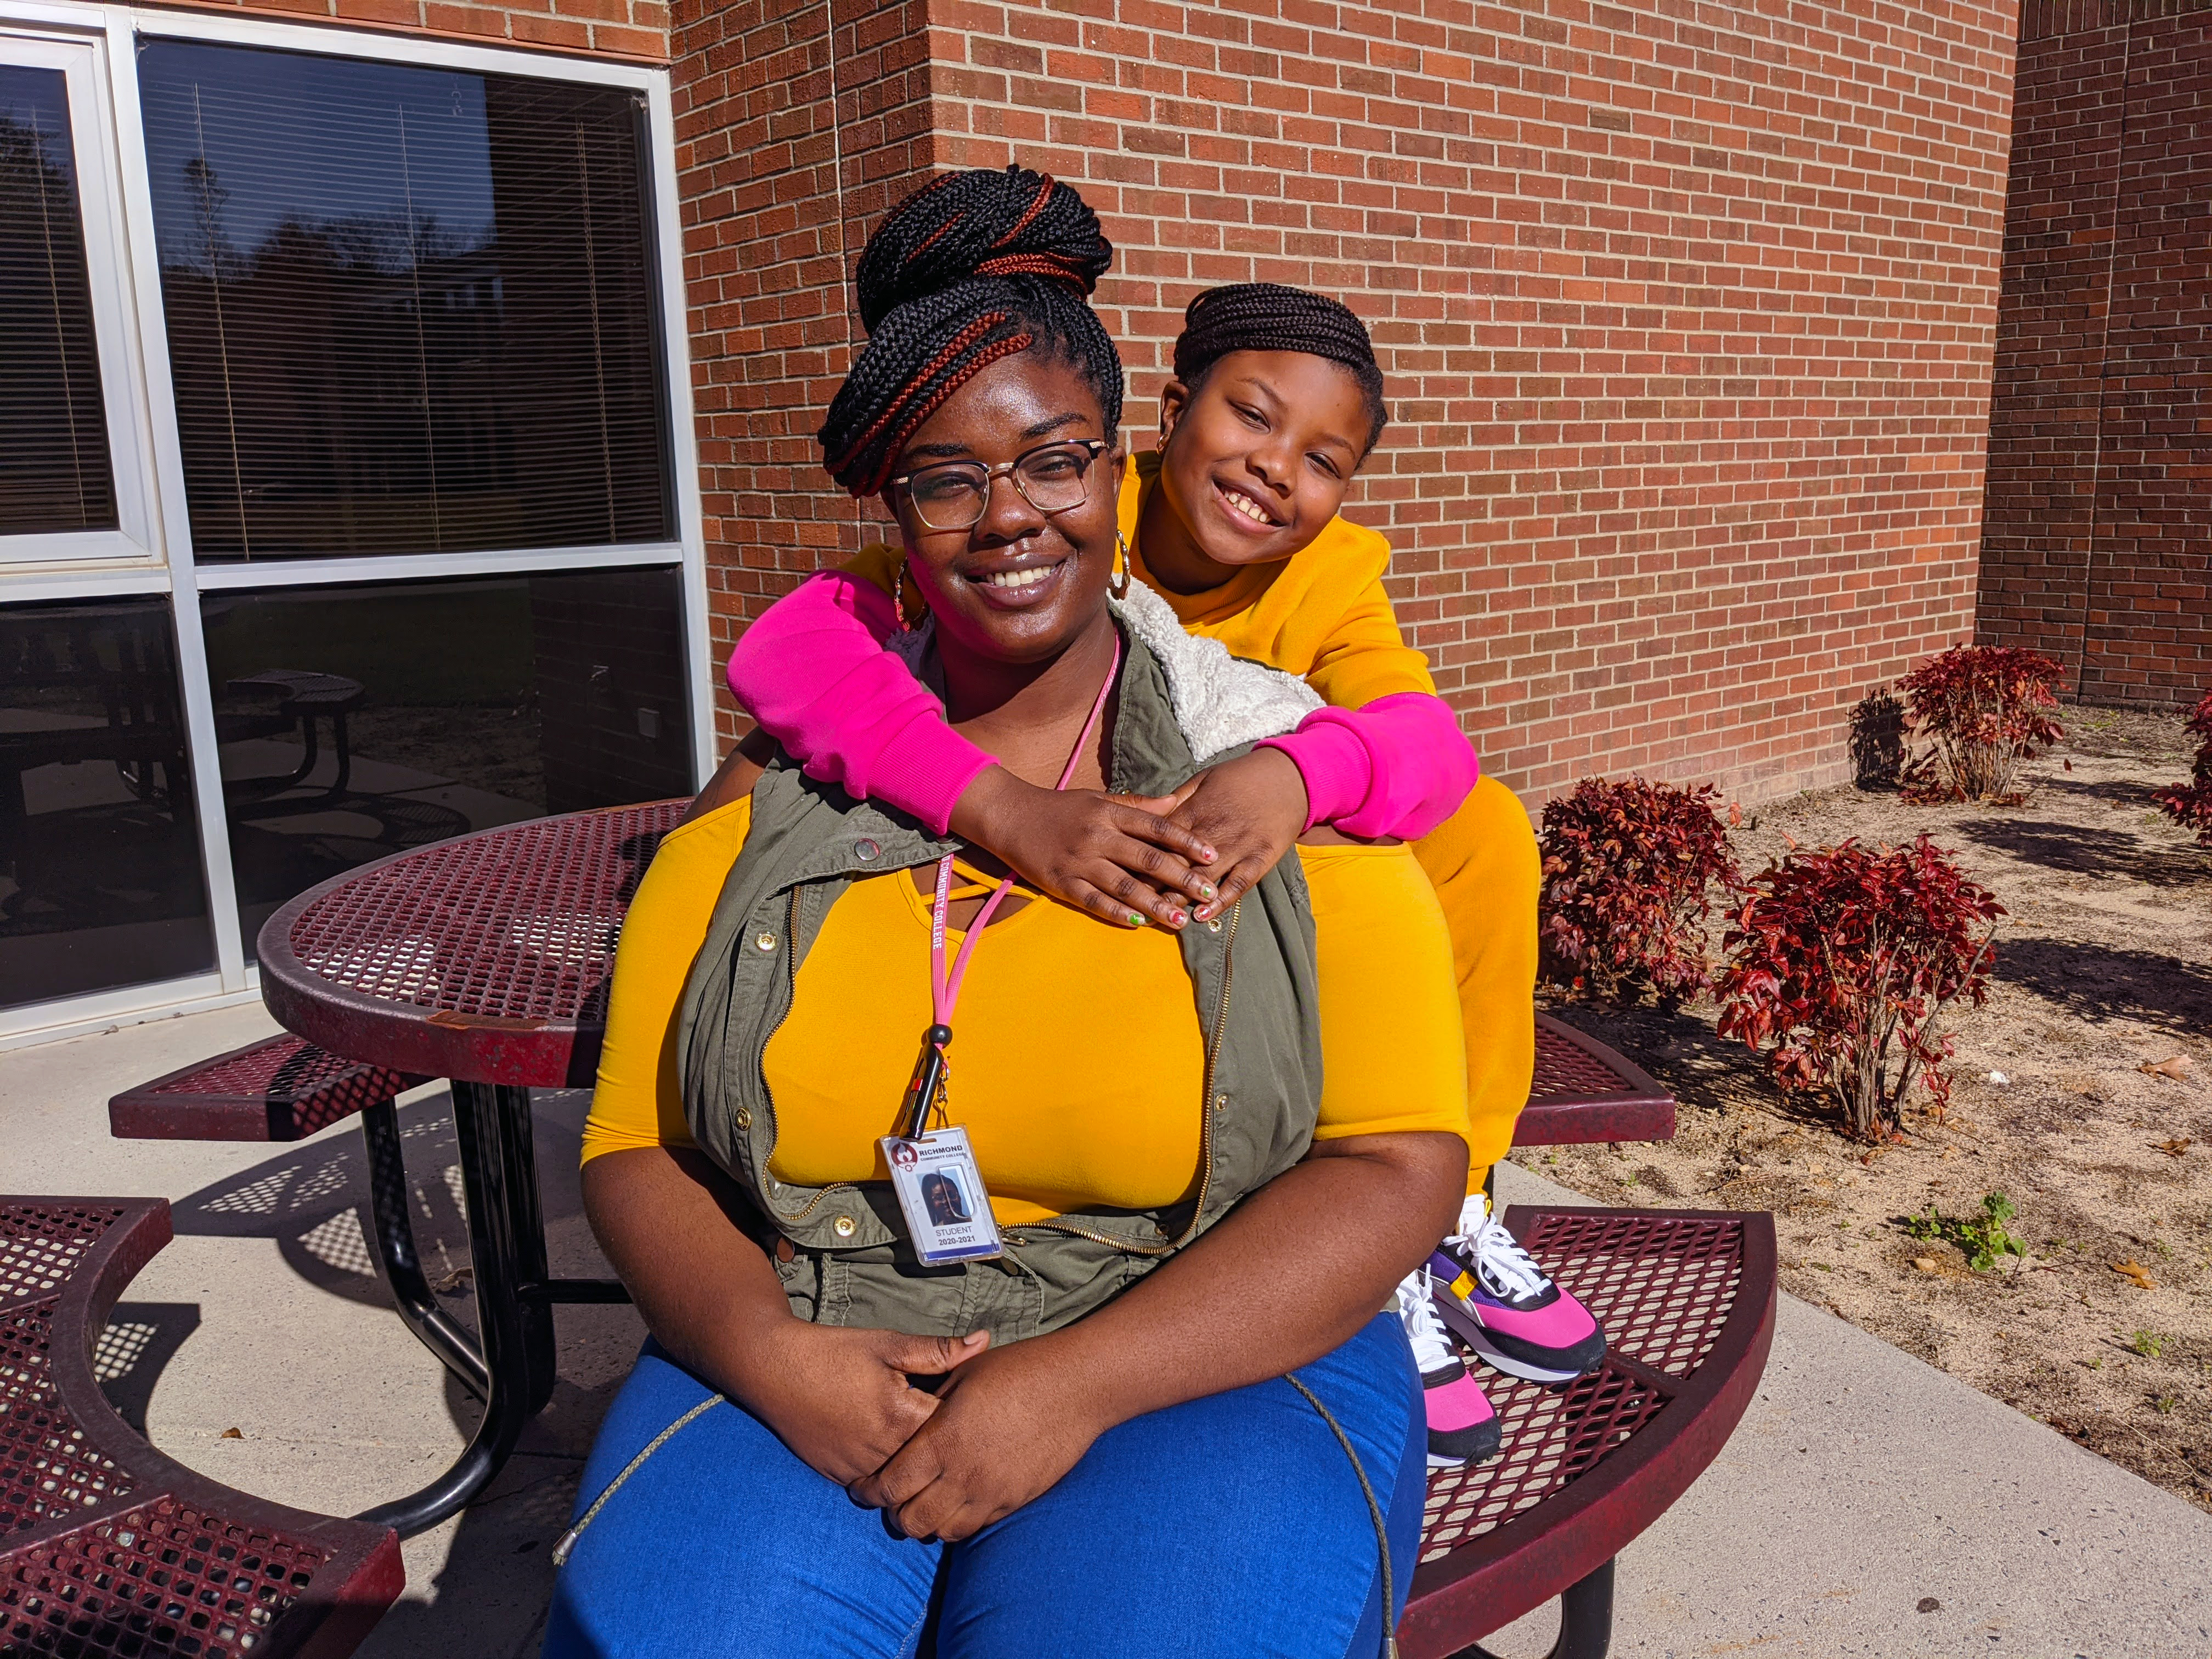 Latecia Smith and her daughter, Sanira, sit on a bench outside a building at RichmondCC.